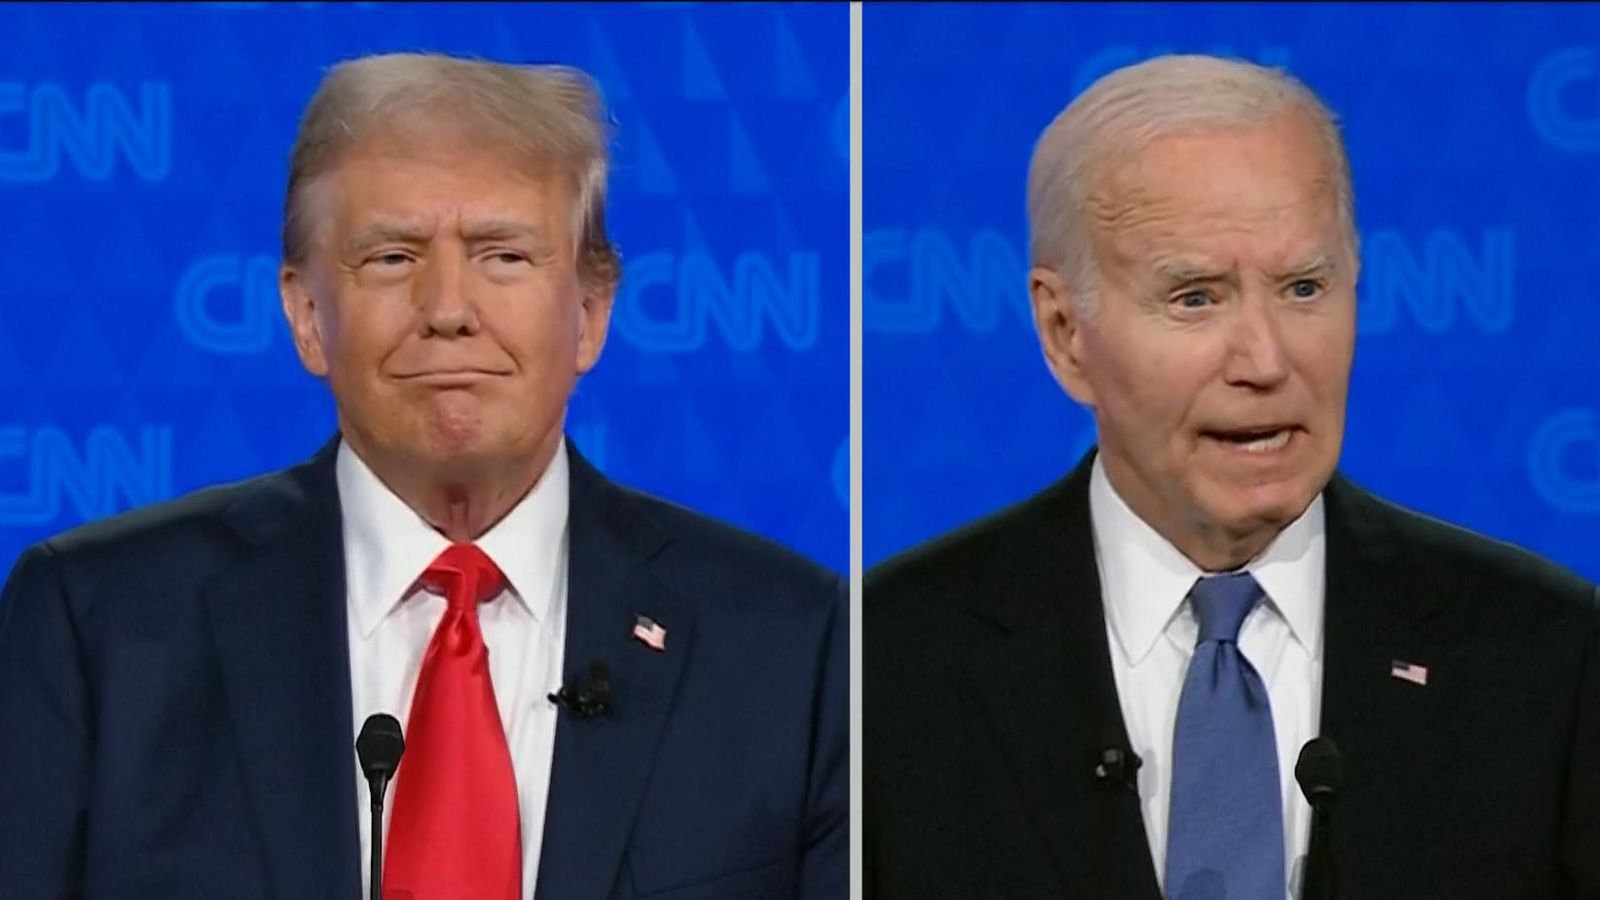 Donald Trump and Joe Biden: The key moments in the first US presidential election debate